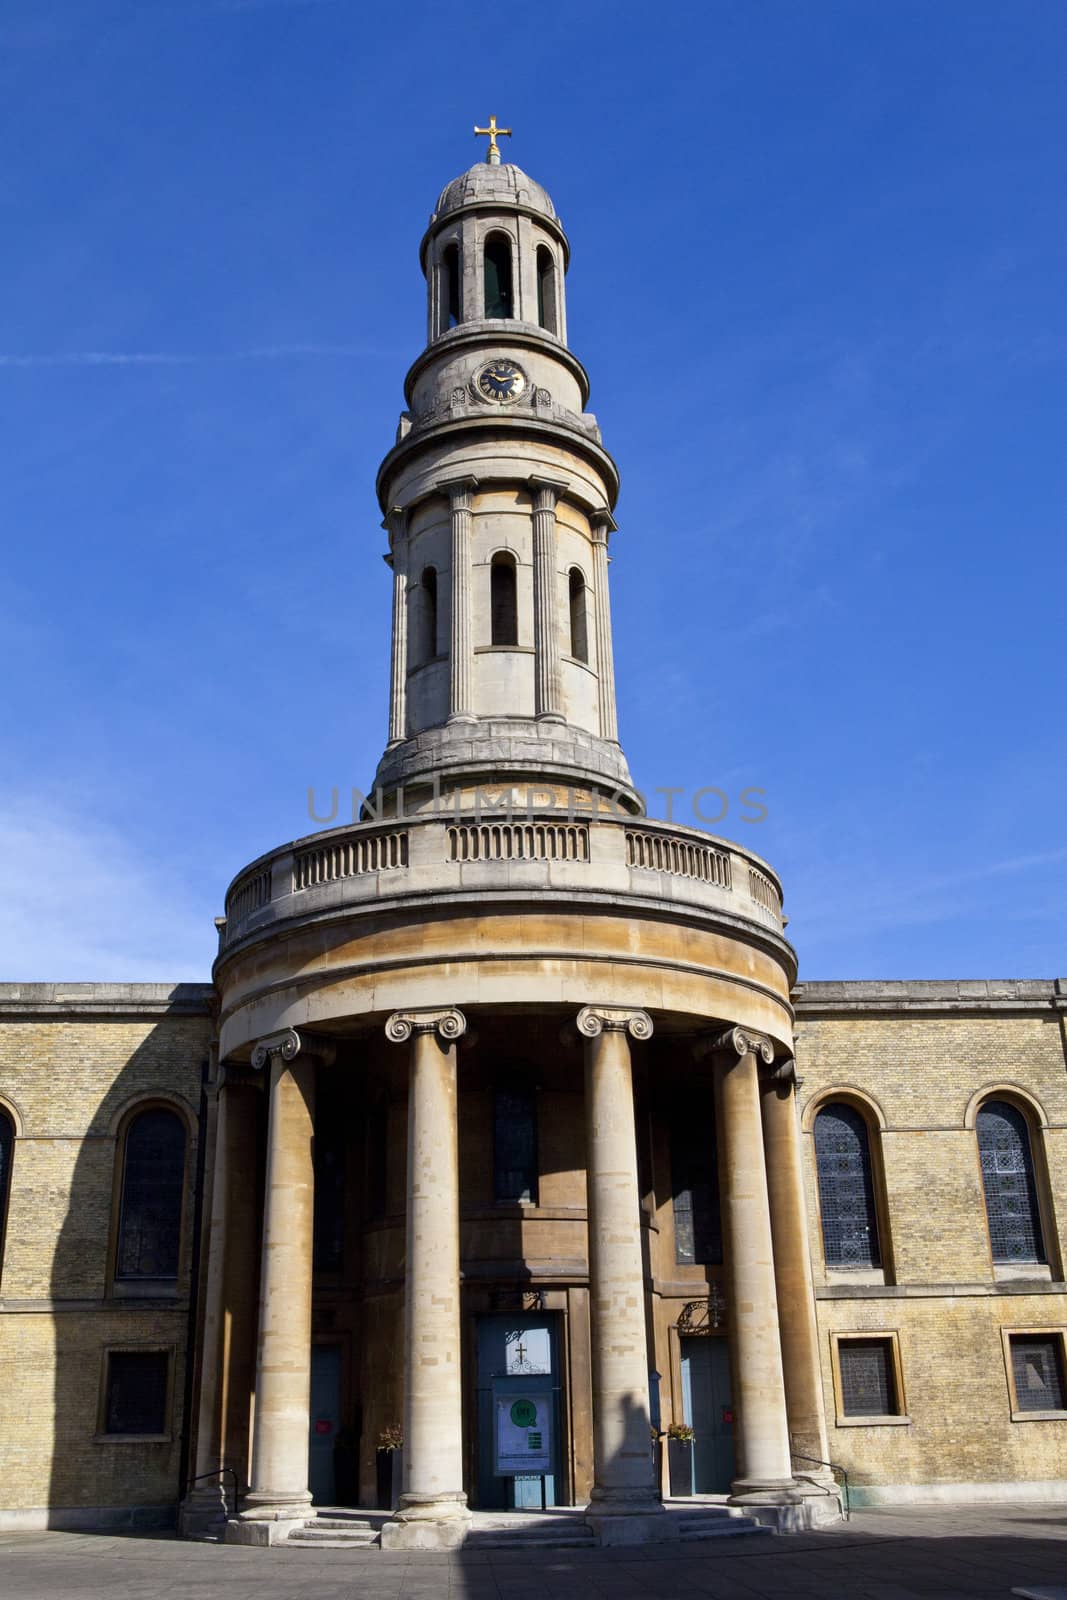 St. Mary's Church in Bryanston Square in London.